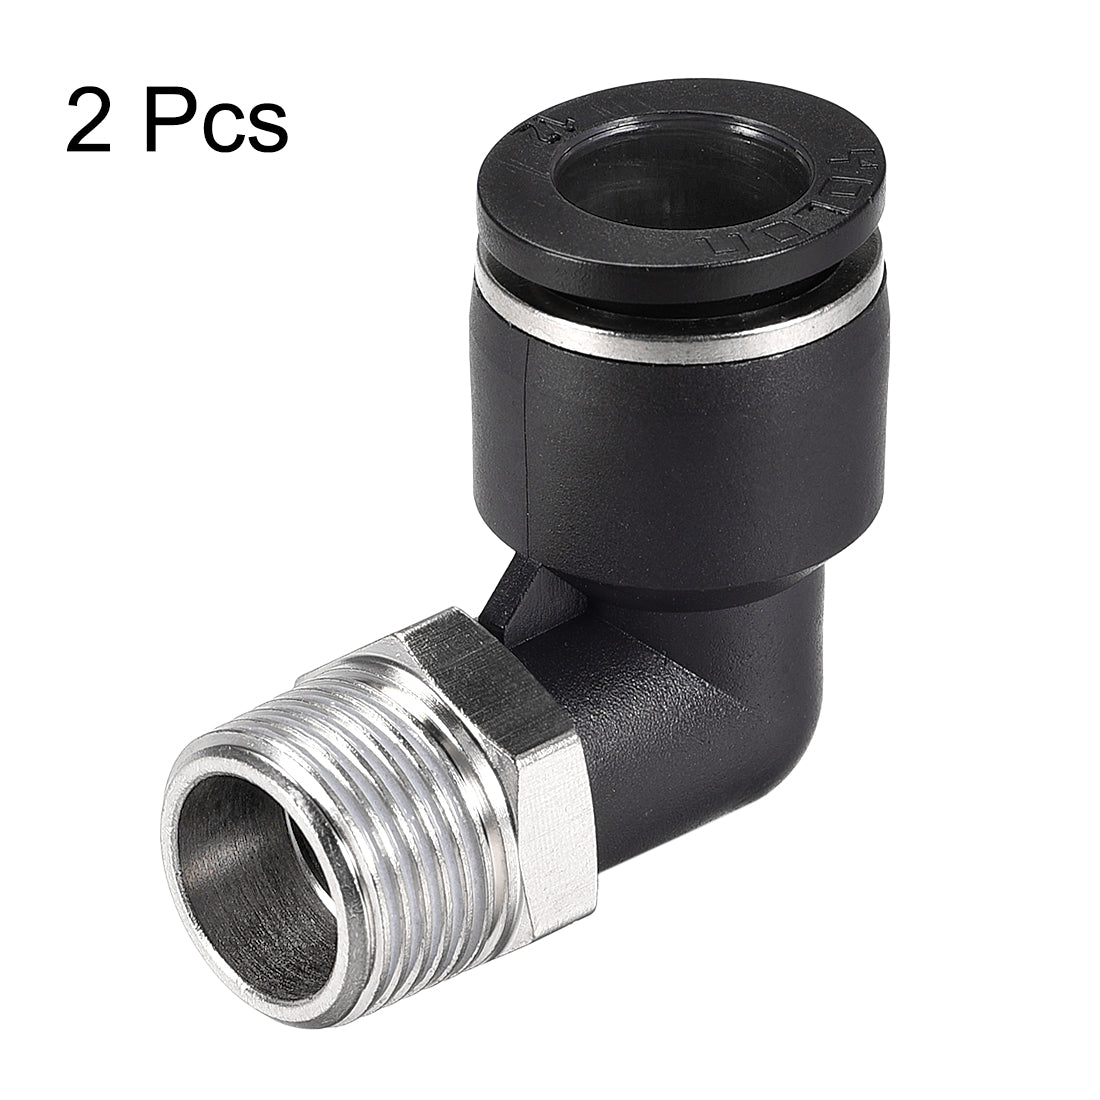 uxcell Uxcell Push to Connect Tube Fitting Male Elbow 12mm Tube OD x 3/8 NPT Thread Pneumatic Air Push Fit Lock Fitting 2pcs